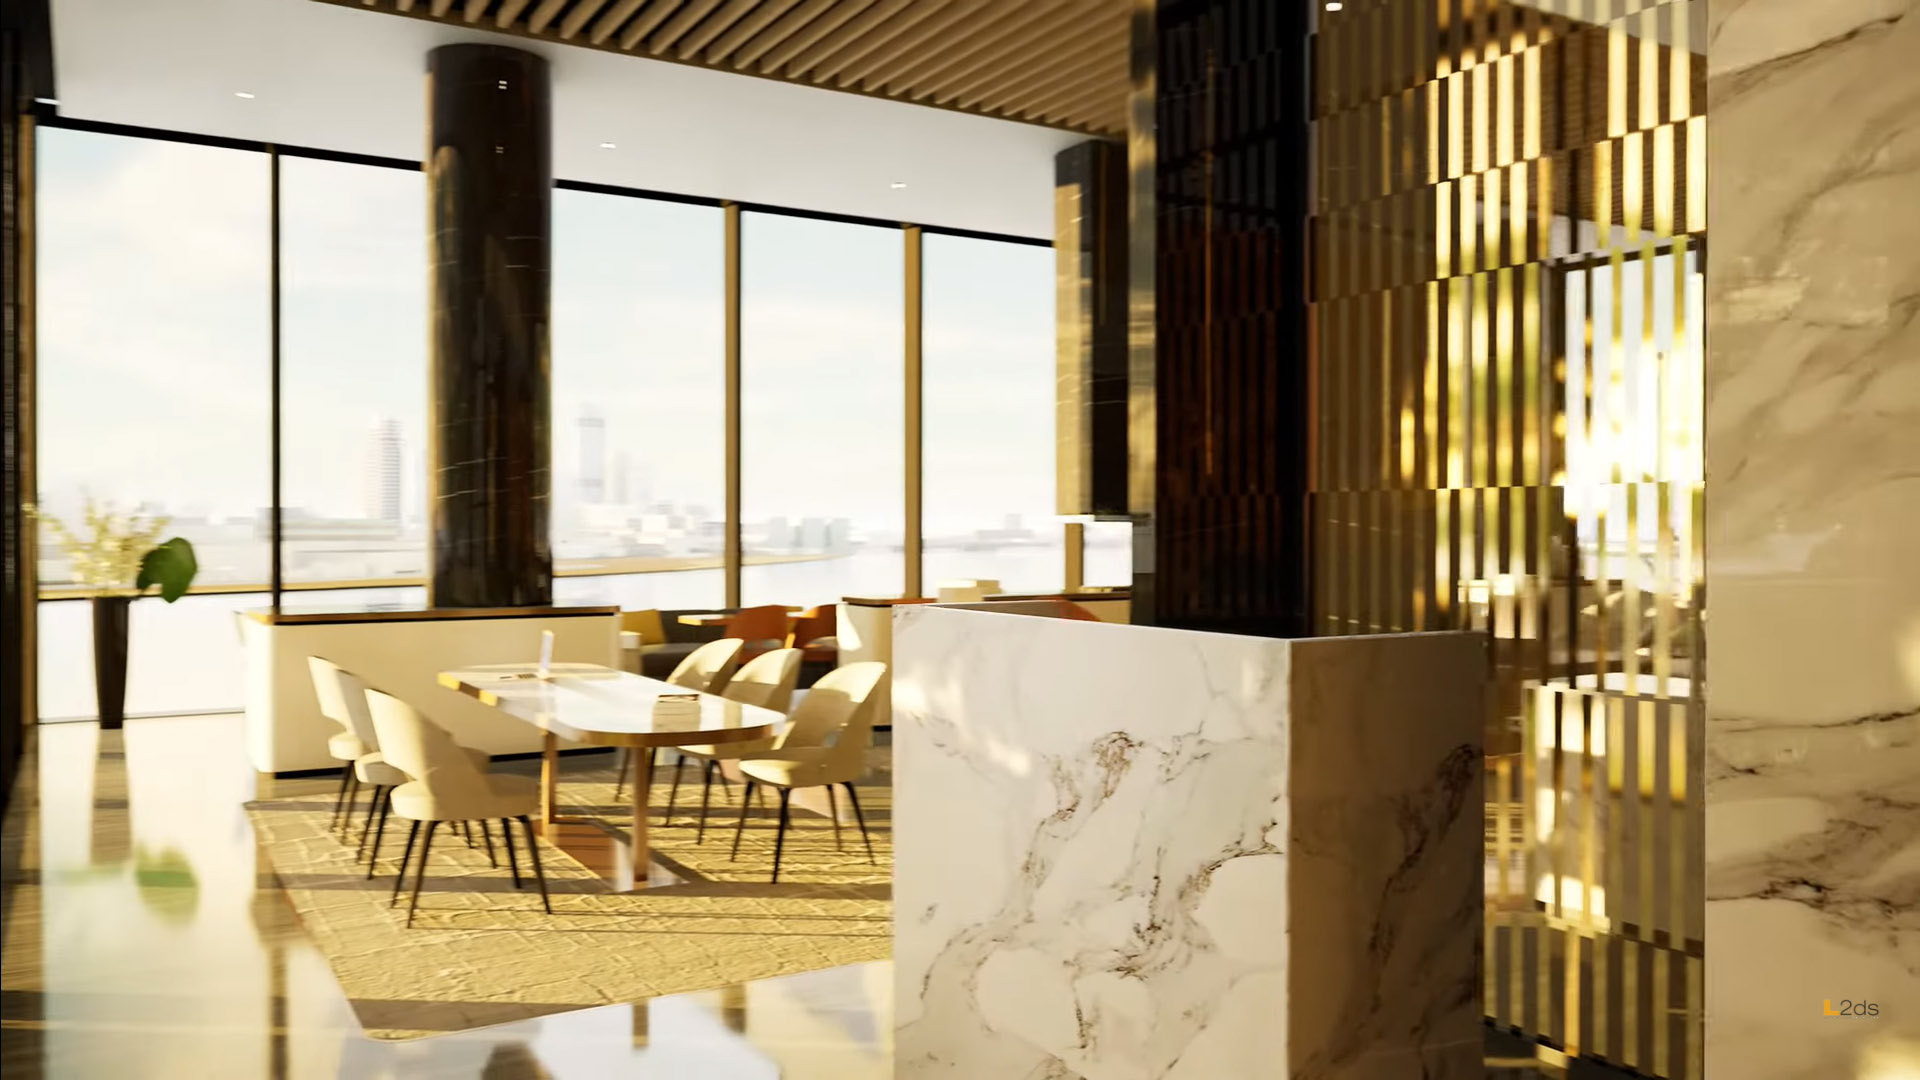 Restaurant and Lounge for a new modern high rise residential development